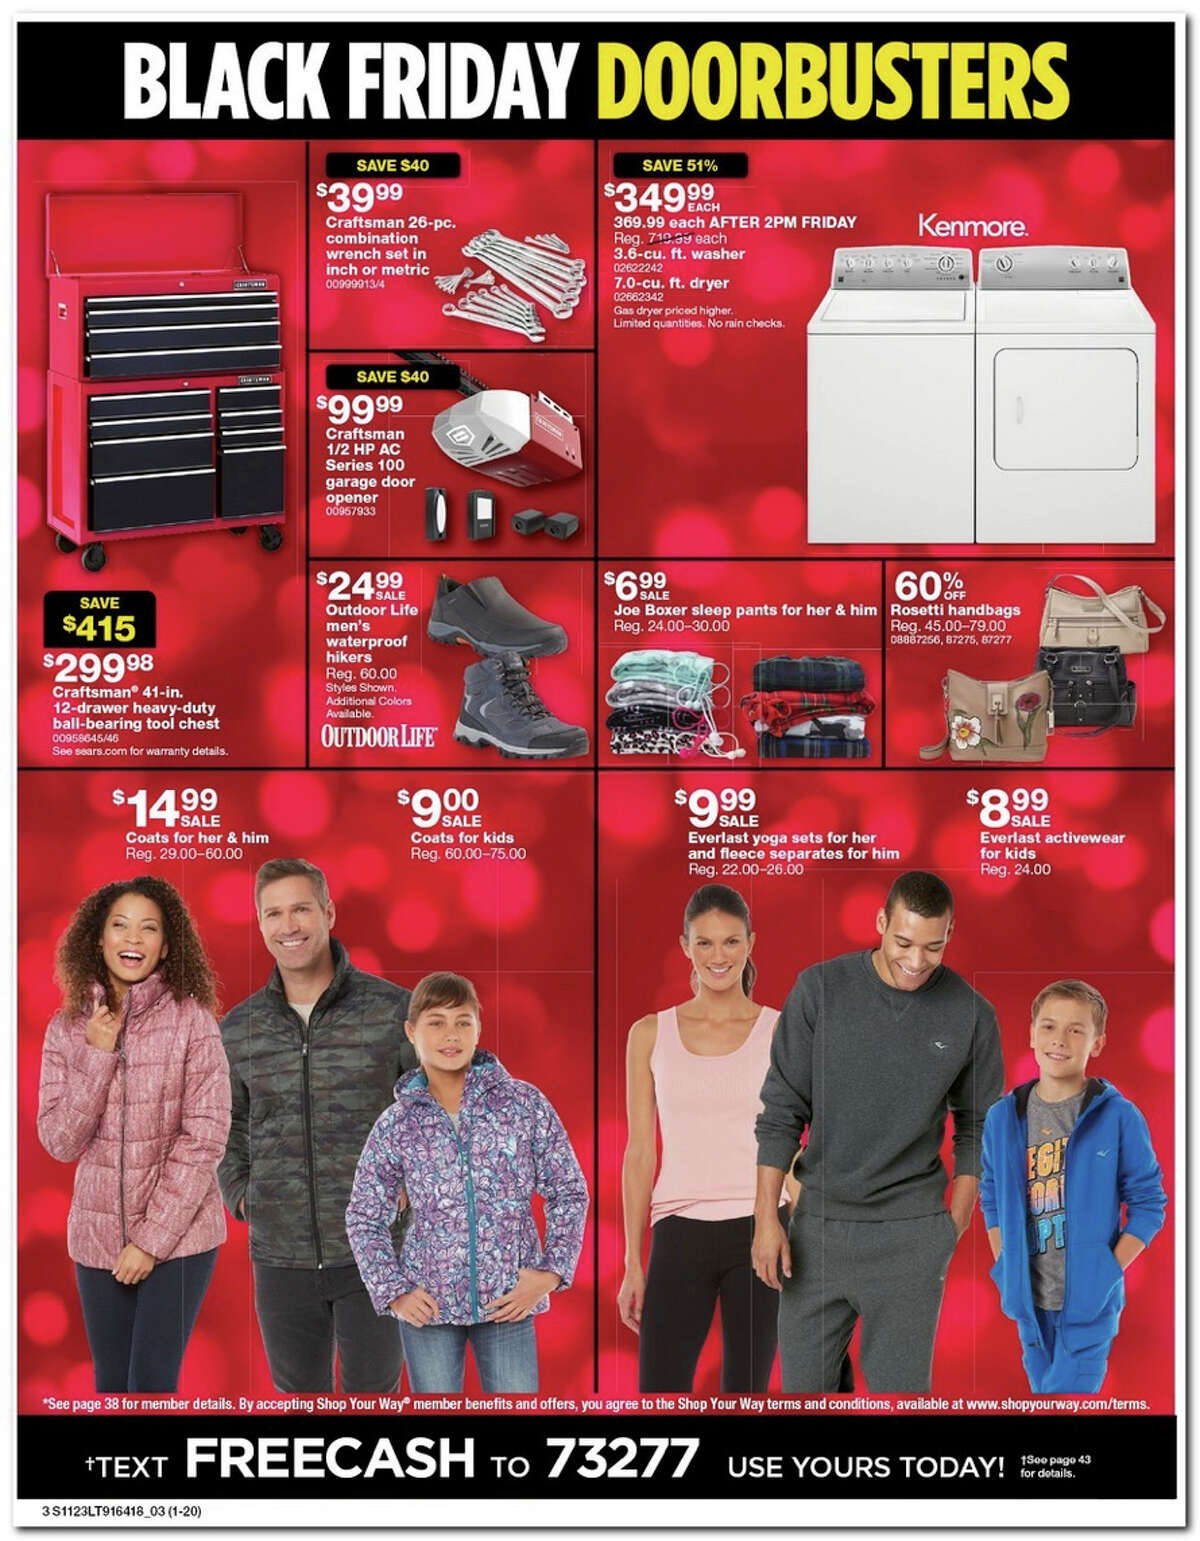 Sears has released its 2017 Black Friday Doorbuster ad. Prices and promotion begin on Thursday, Nov. 23 at 6 p.m. and are subject to change and availability, based on the retailer's determination.